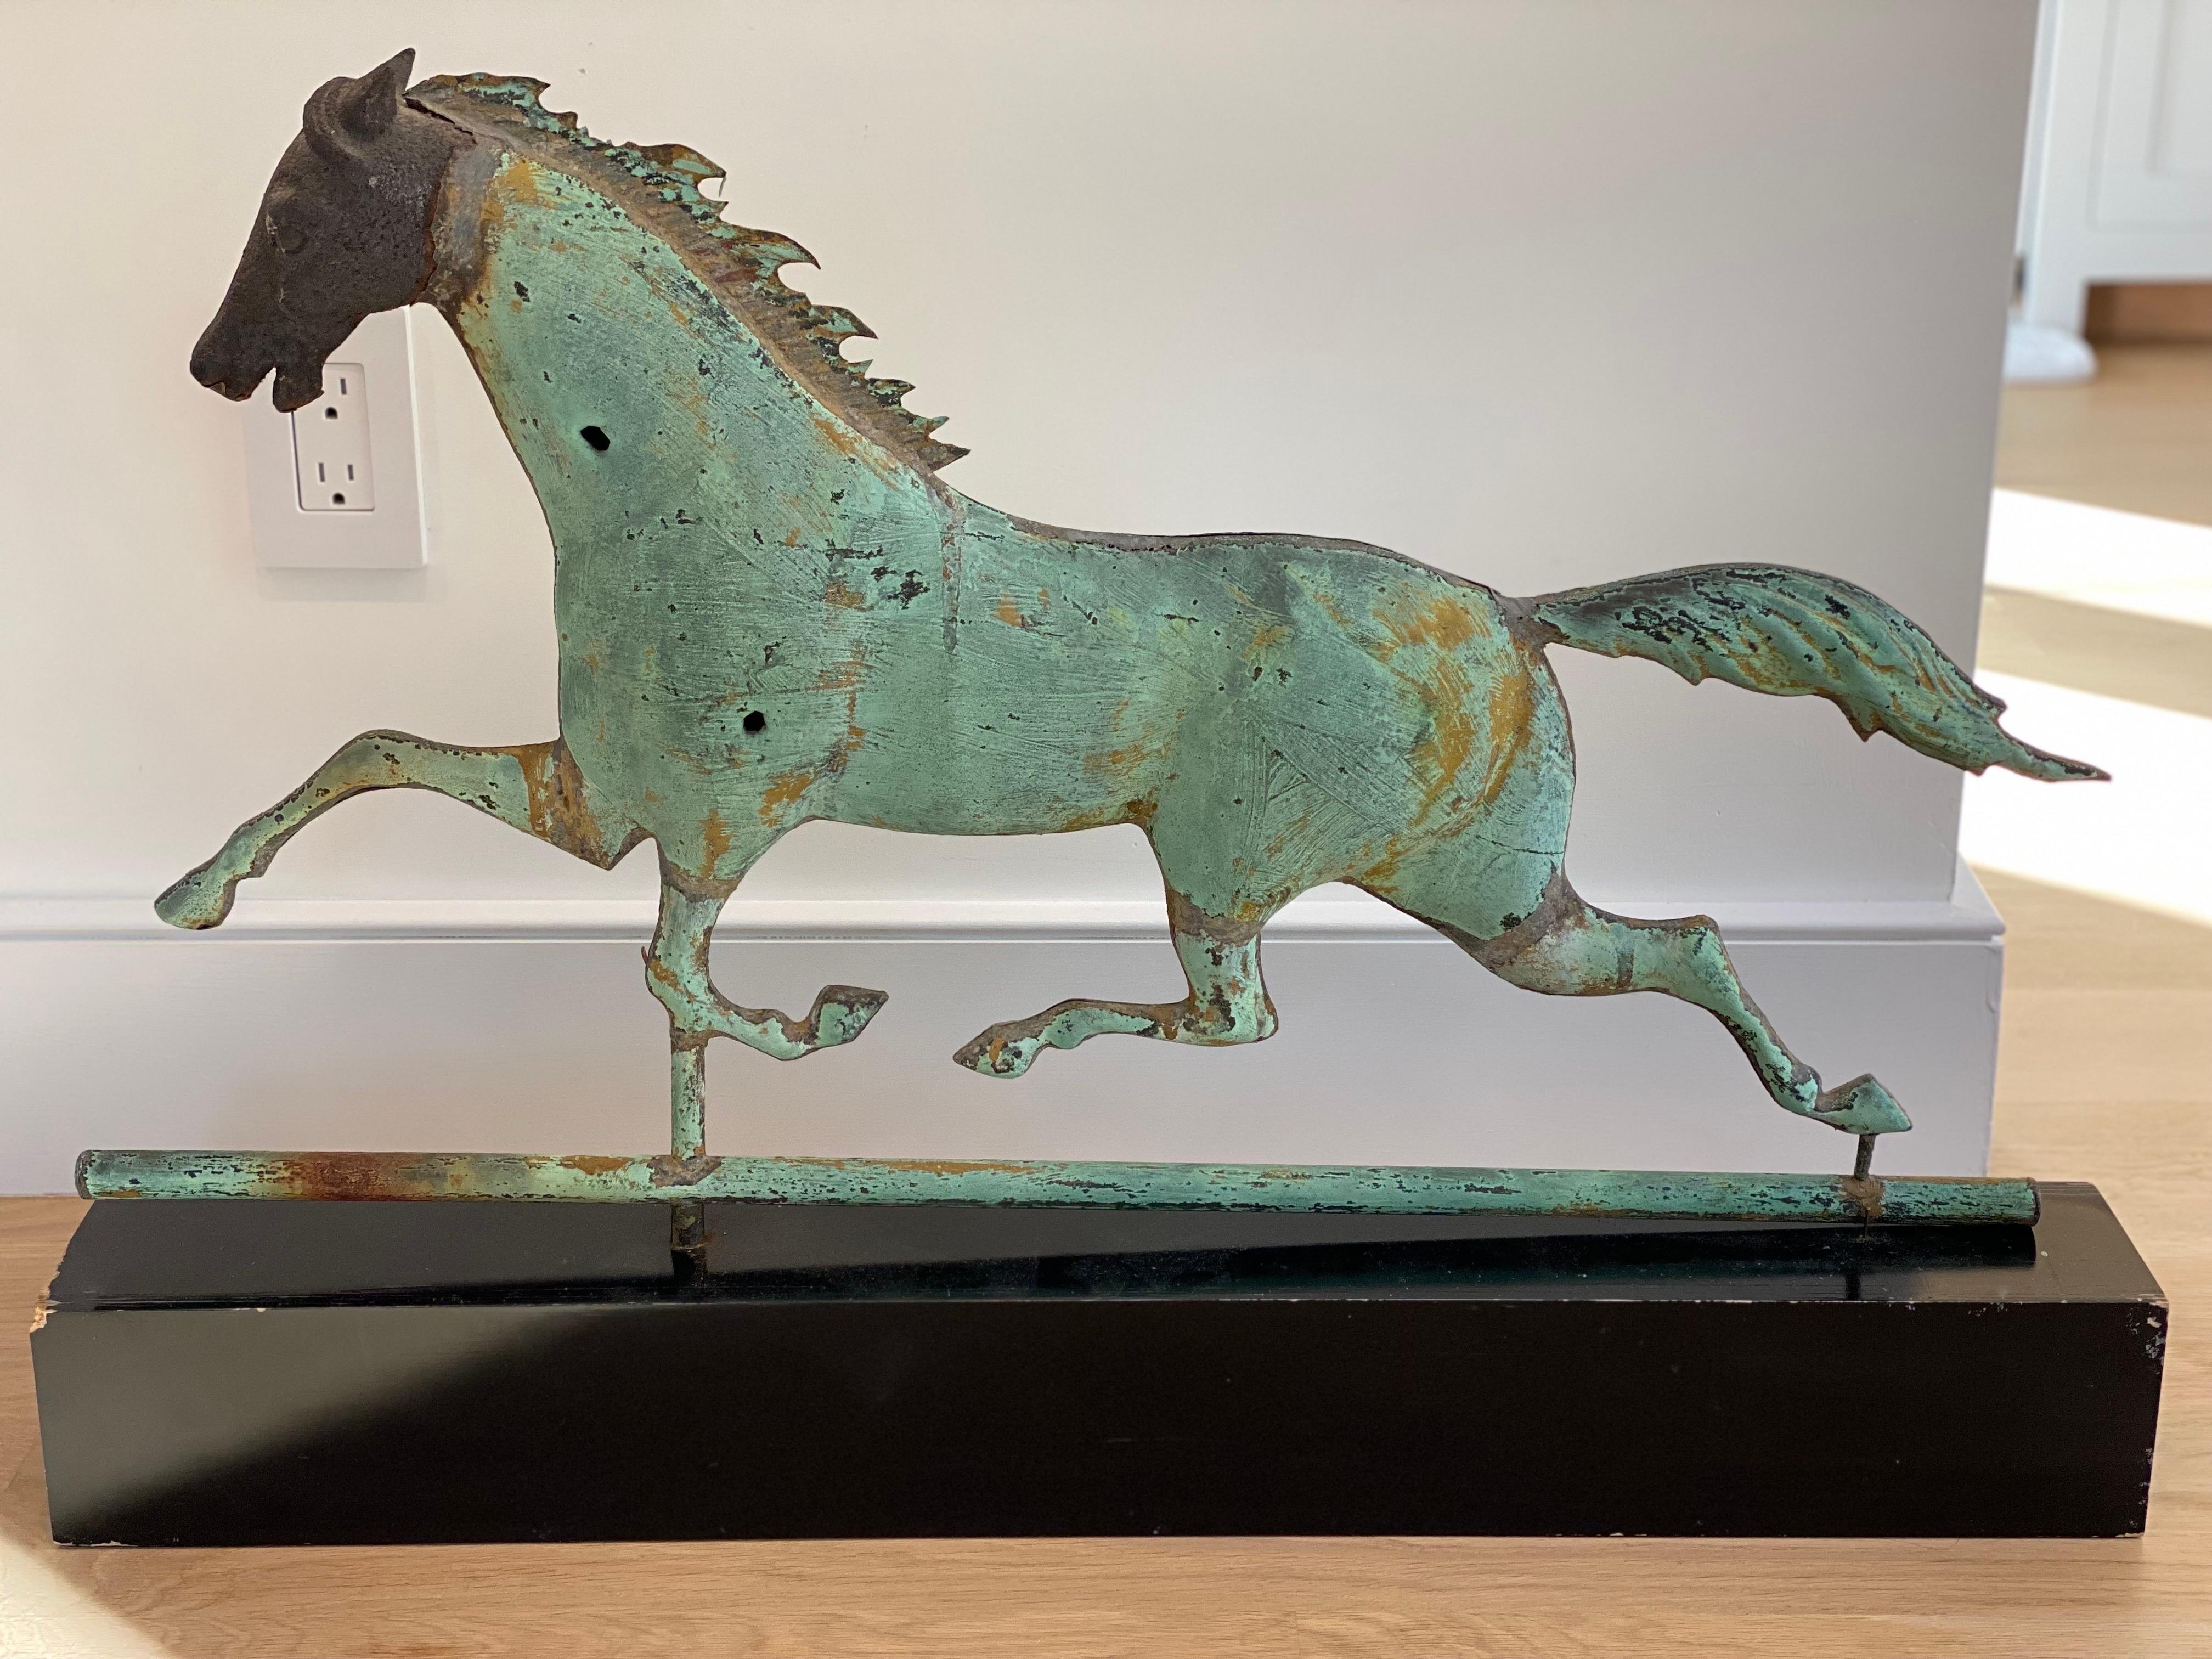 Copper Running Horse Weathervane, New England
Nice looking running horse weathervane with verdigris patinated copper finish. Head shows further weathering. Mounted on a black painted wooden plinth. Wear to edges of the box. General wear to